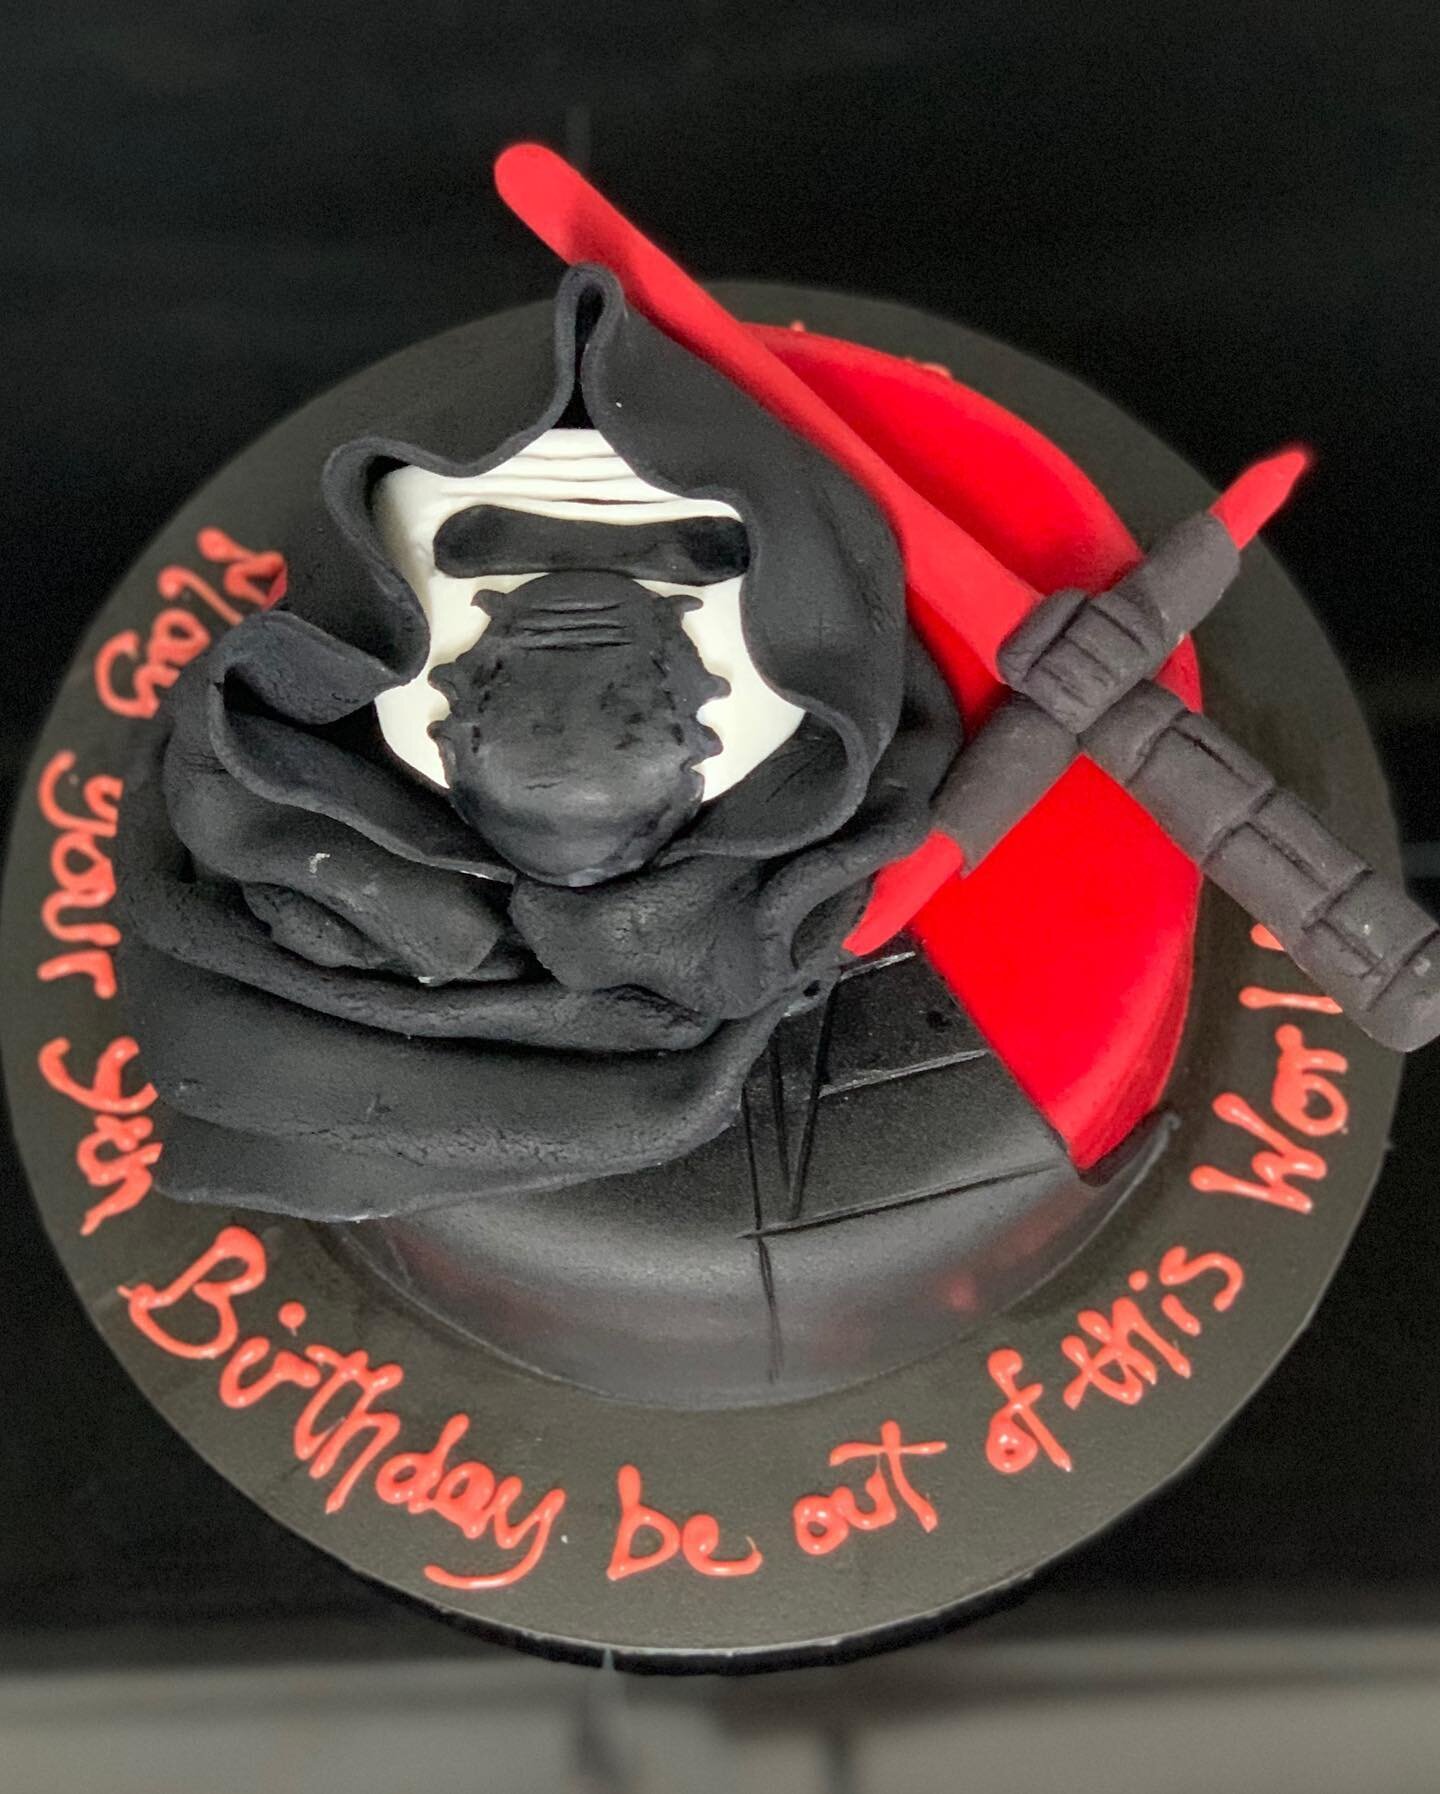 Sometimes birthdays coincide with special days (such as Mother&rsquo;s Day). A lovely local mum made this Mother&rsquo;s Day all about her son&rsquo;s birthday, featuring a Kylo Ren cake. 

White Chocolate Mud Cake marbled red &amp; white layered &am